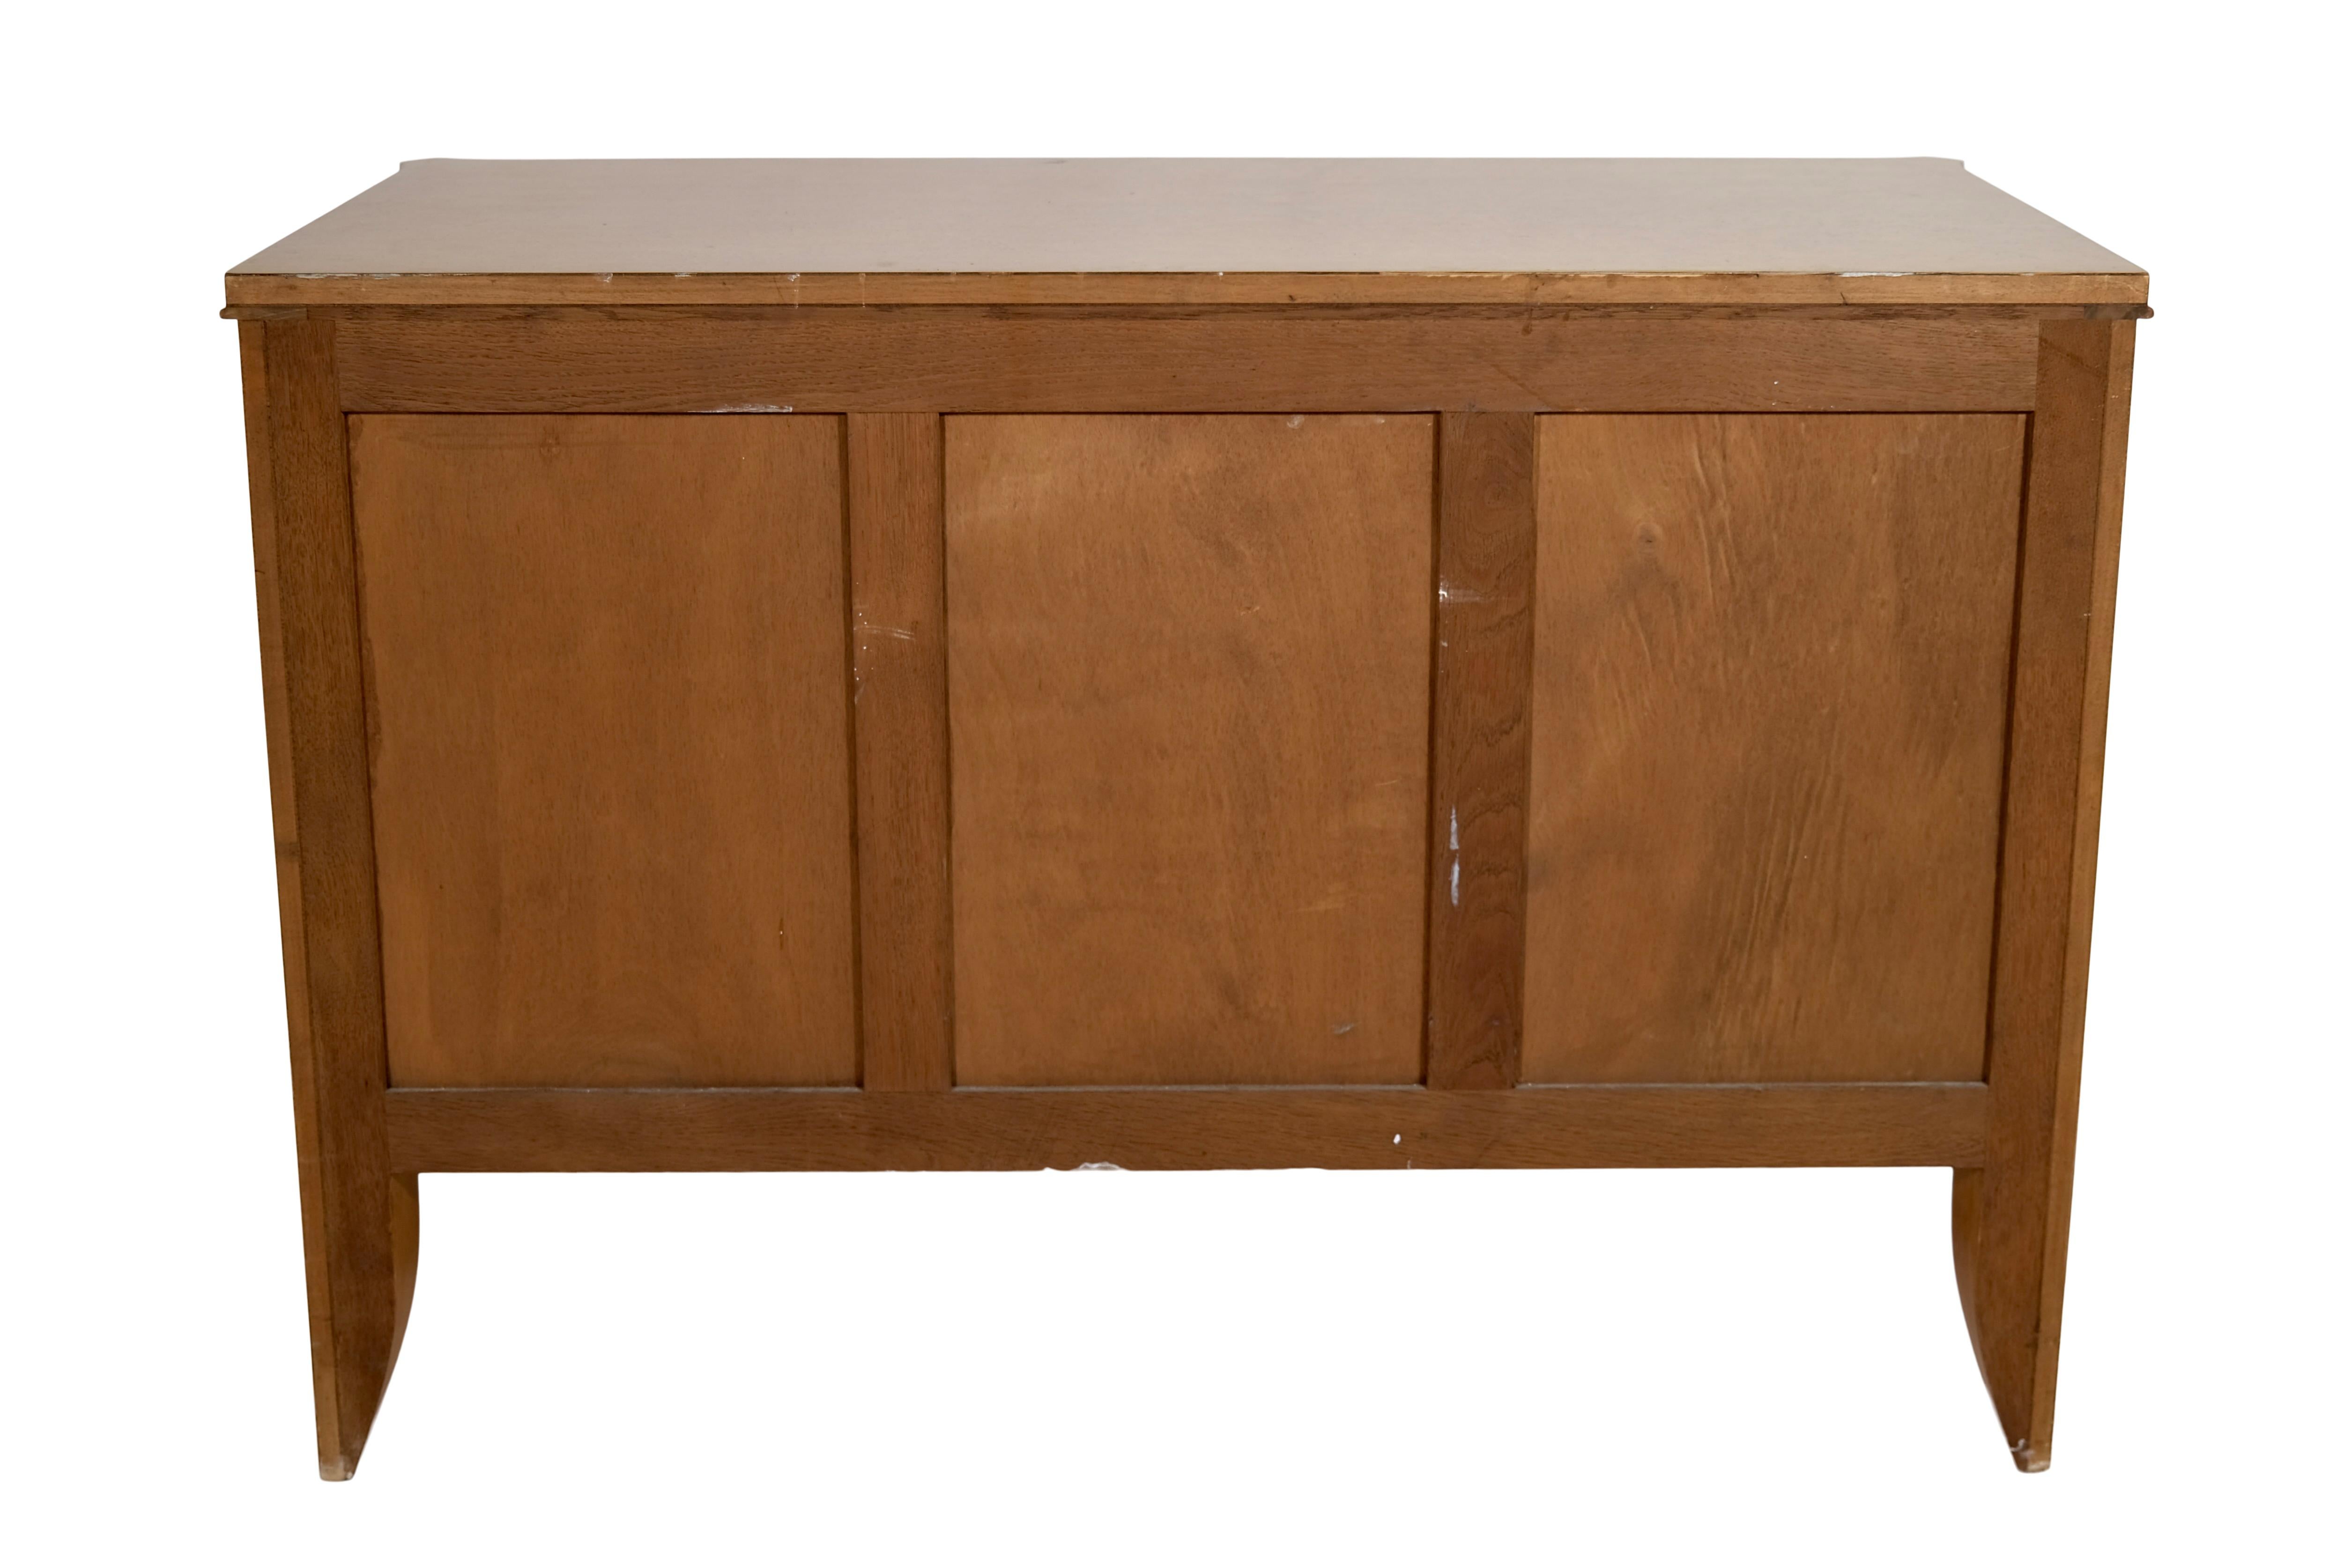 French 1930s Jean Pascaud Art Deco Chest Of Drawers in Birdseye Maple For Sale 5